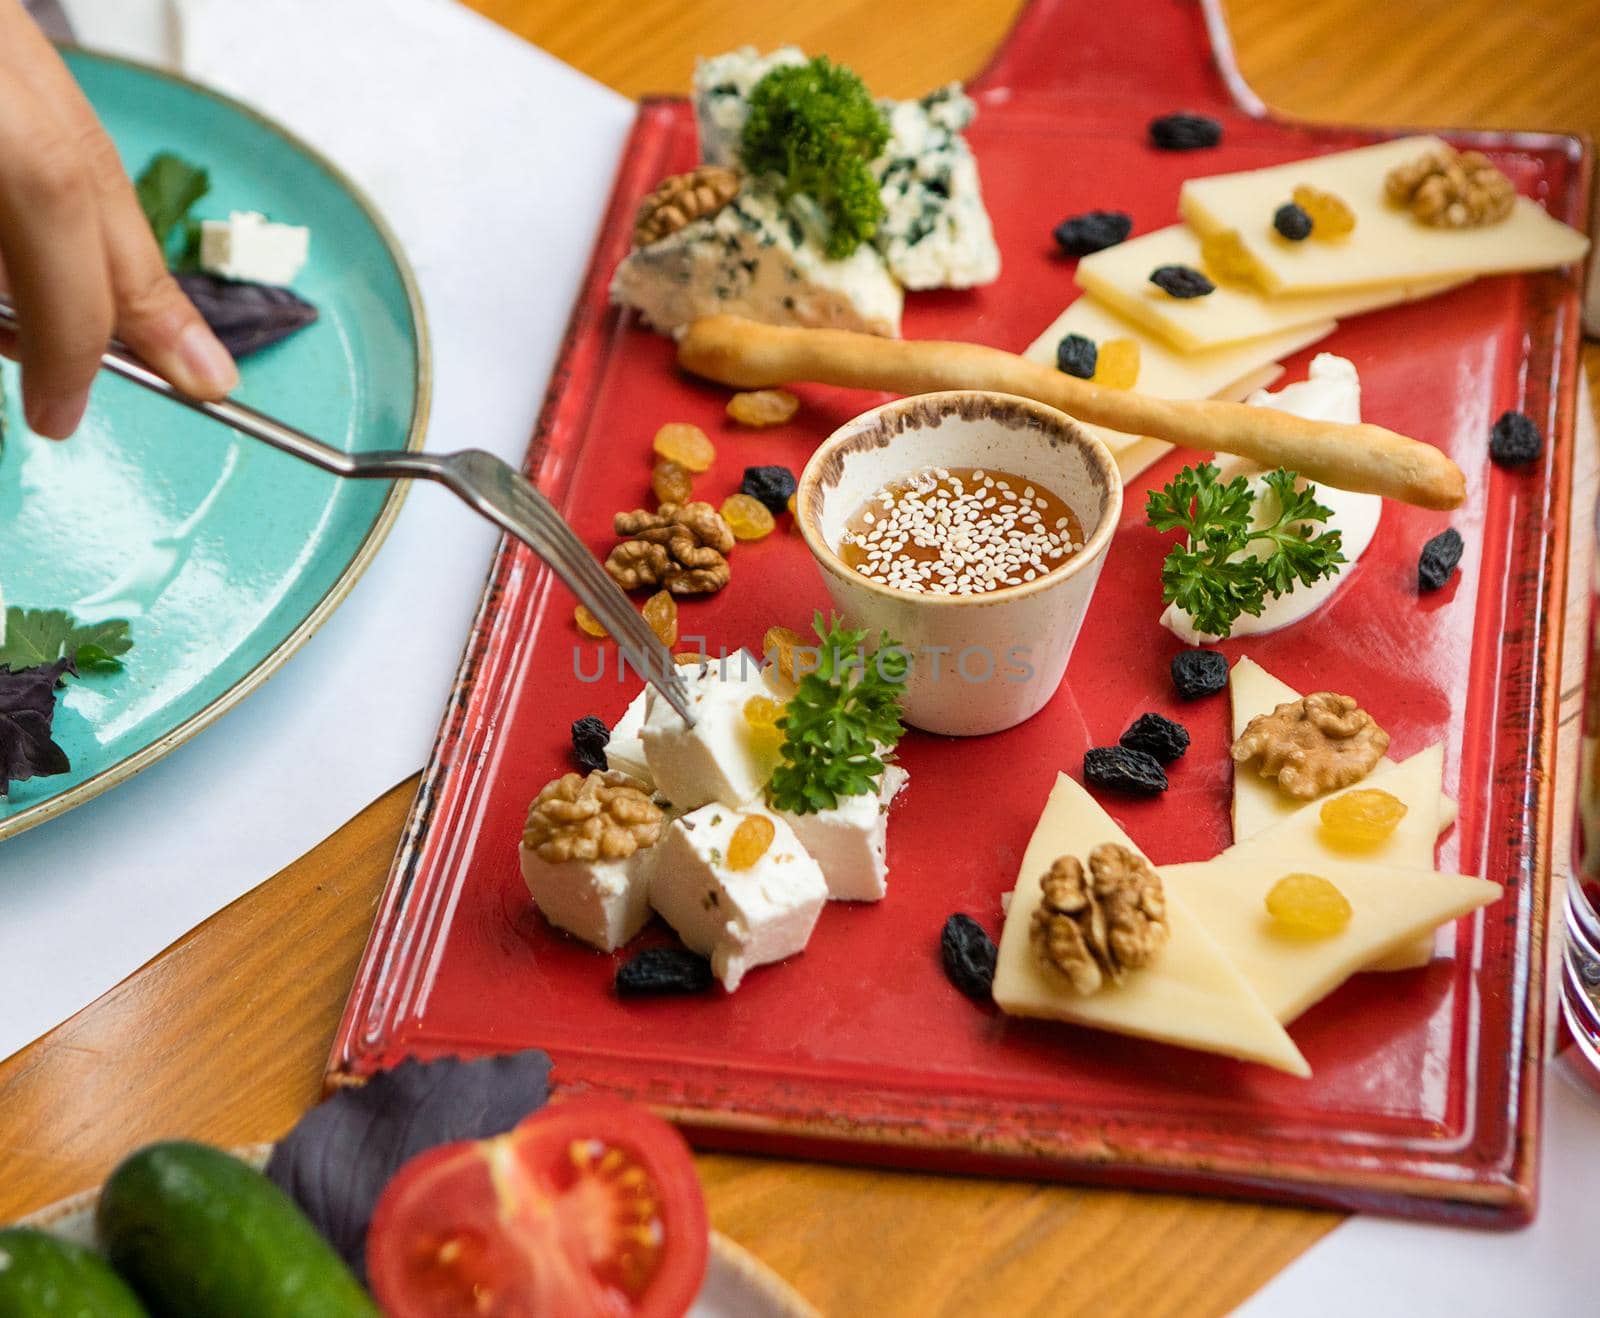 Cheese assorti on the red plate